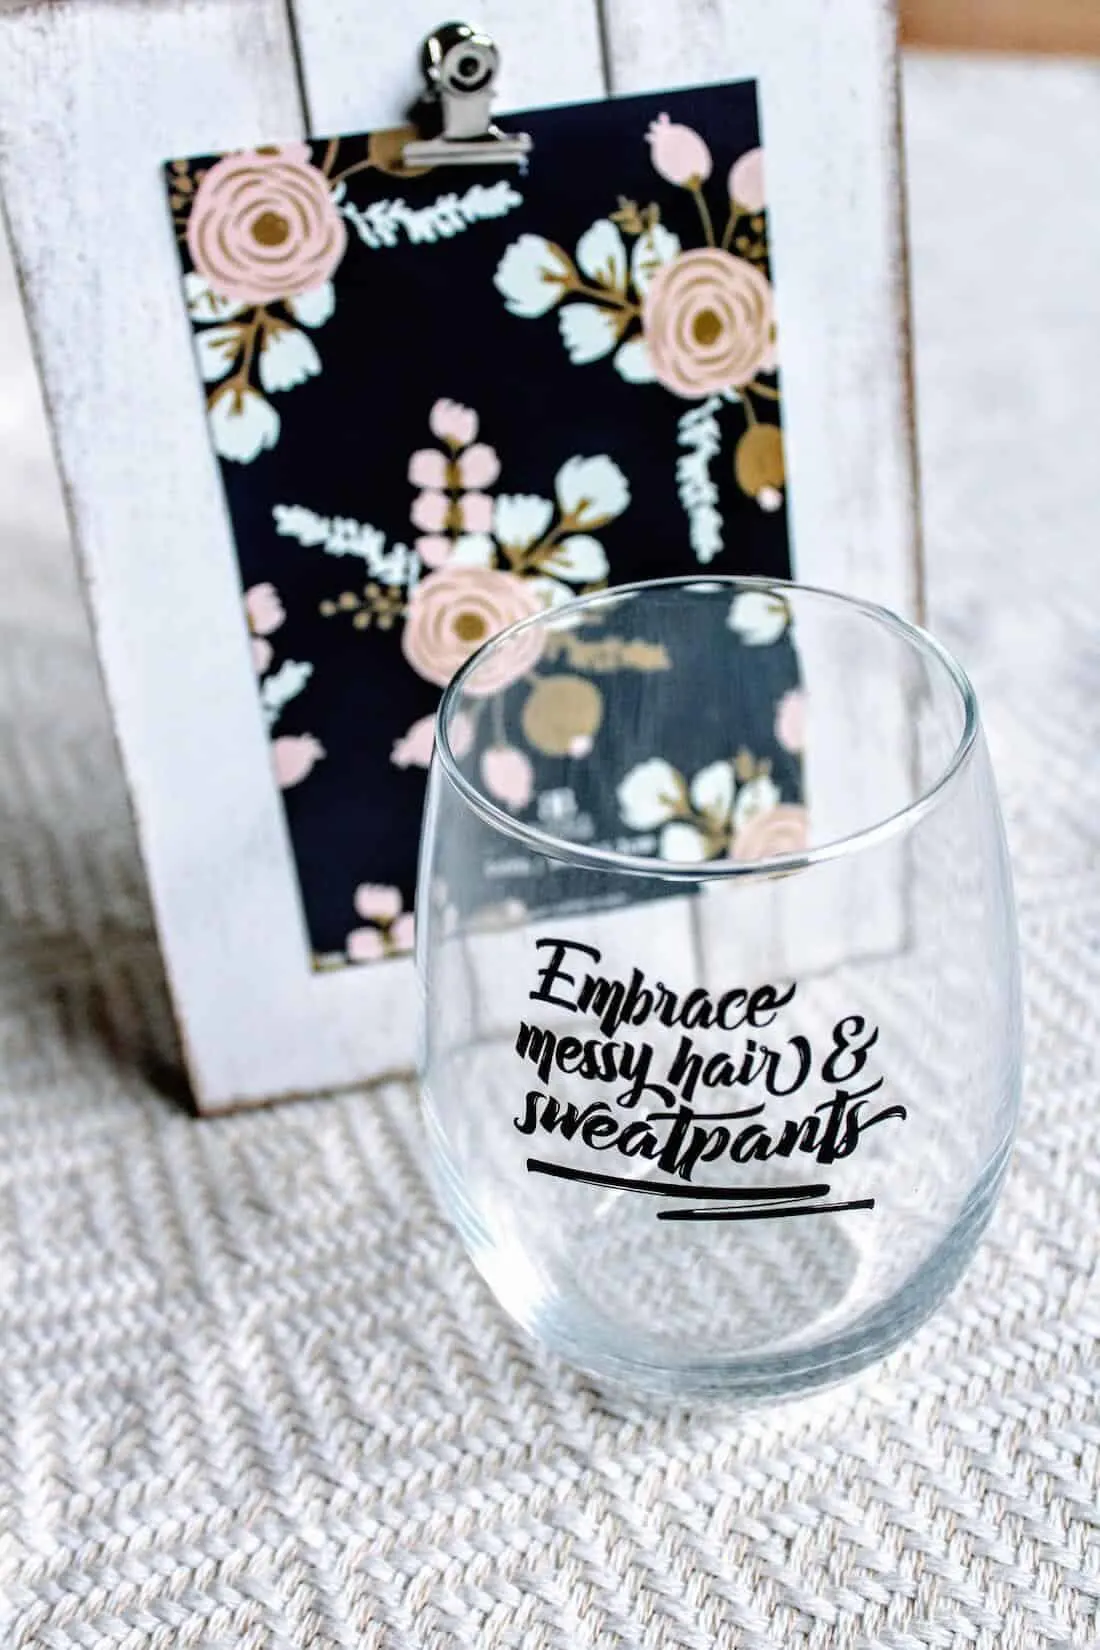 Embrace messy hair and sweatpants wine glass next to picture frame for gift basket.